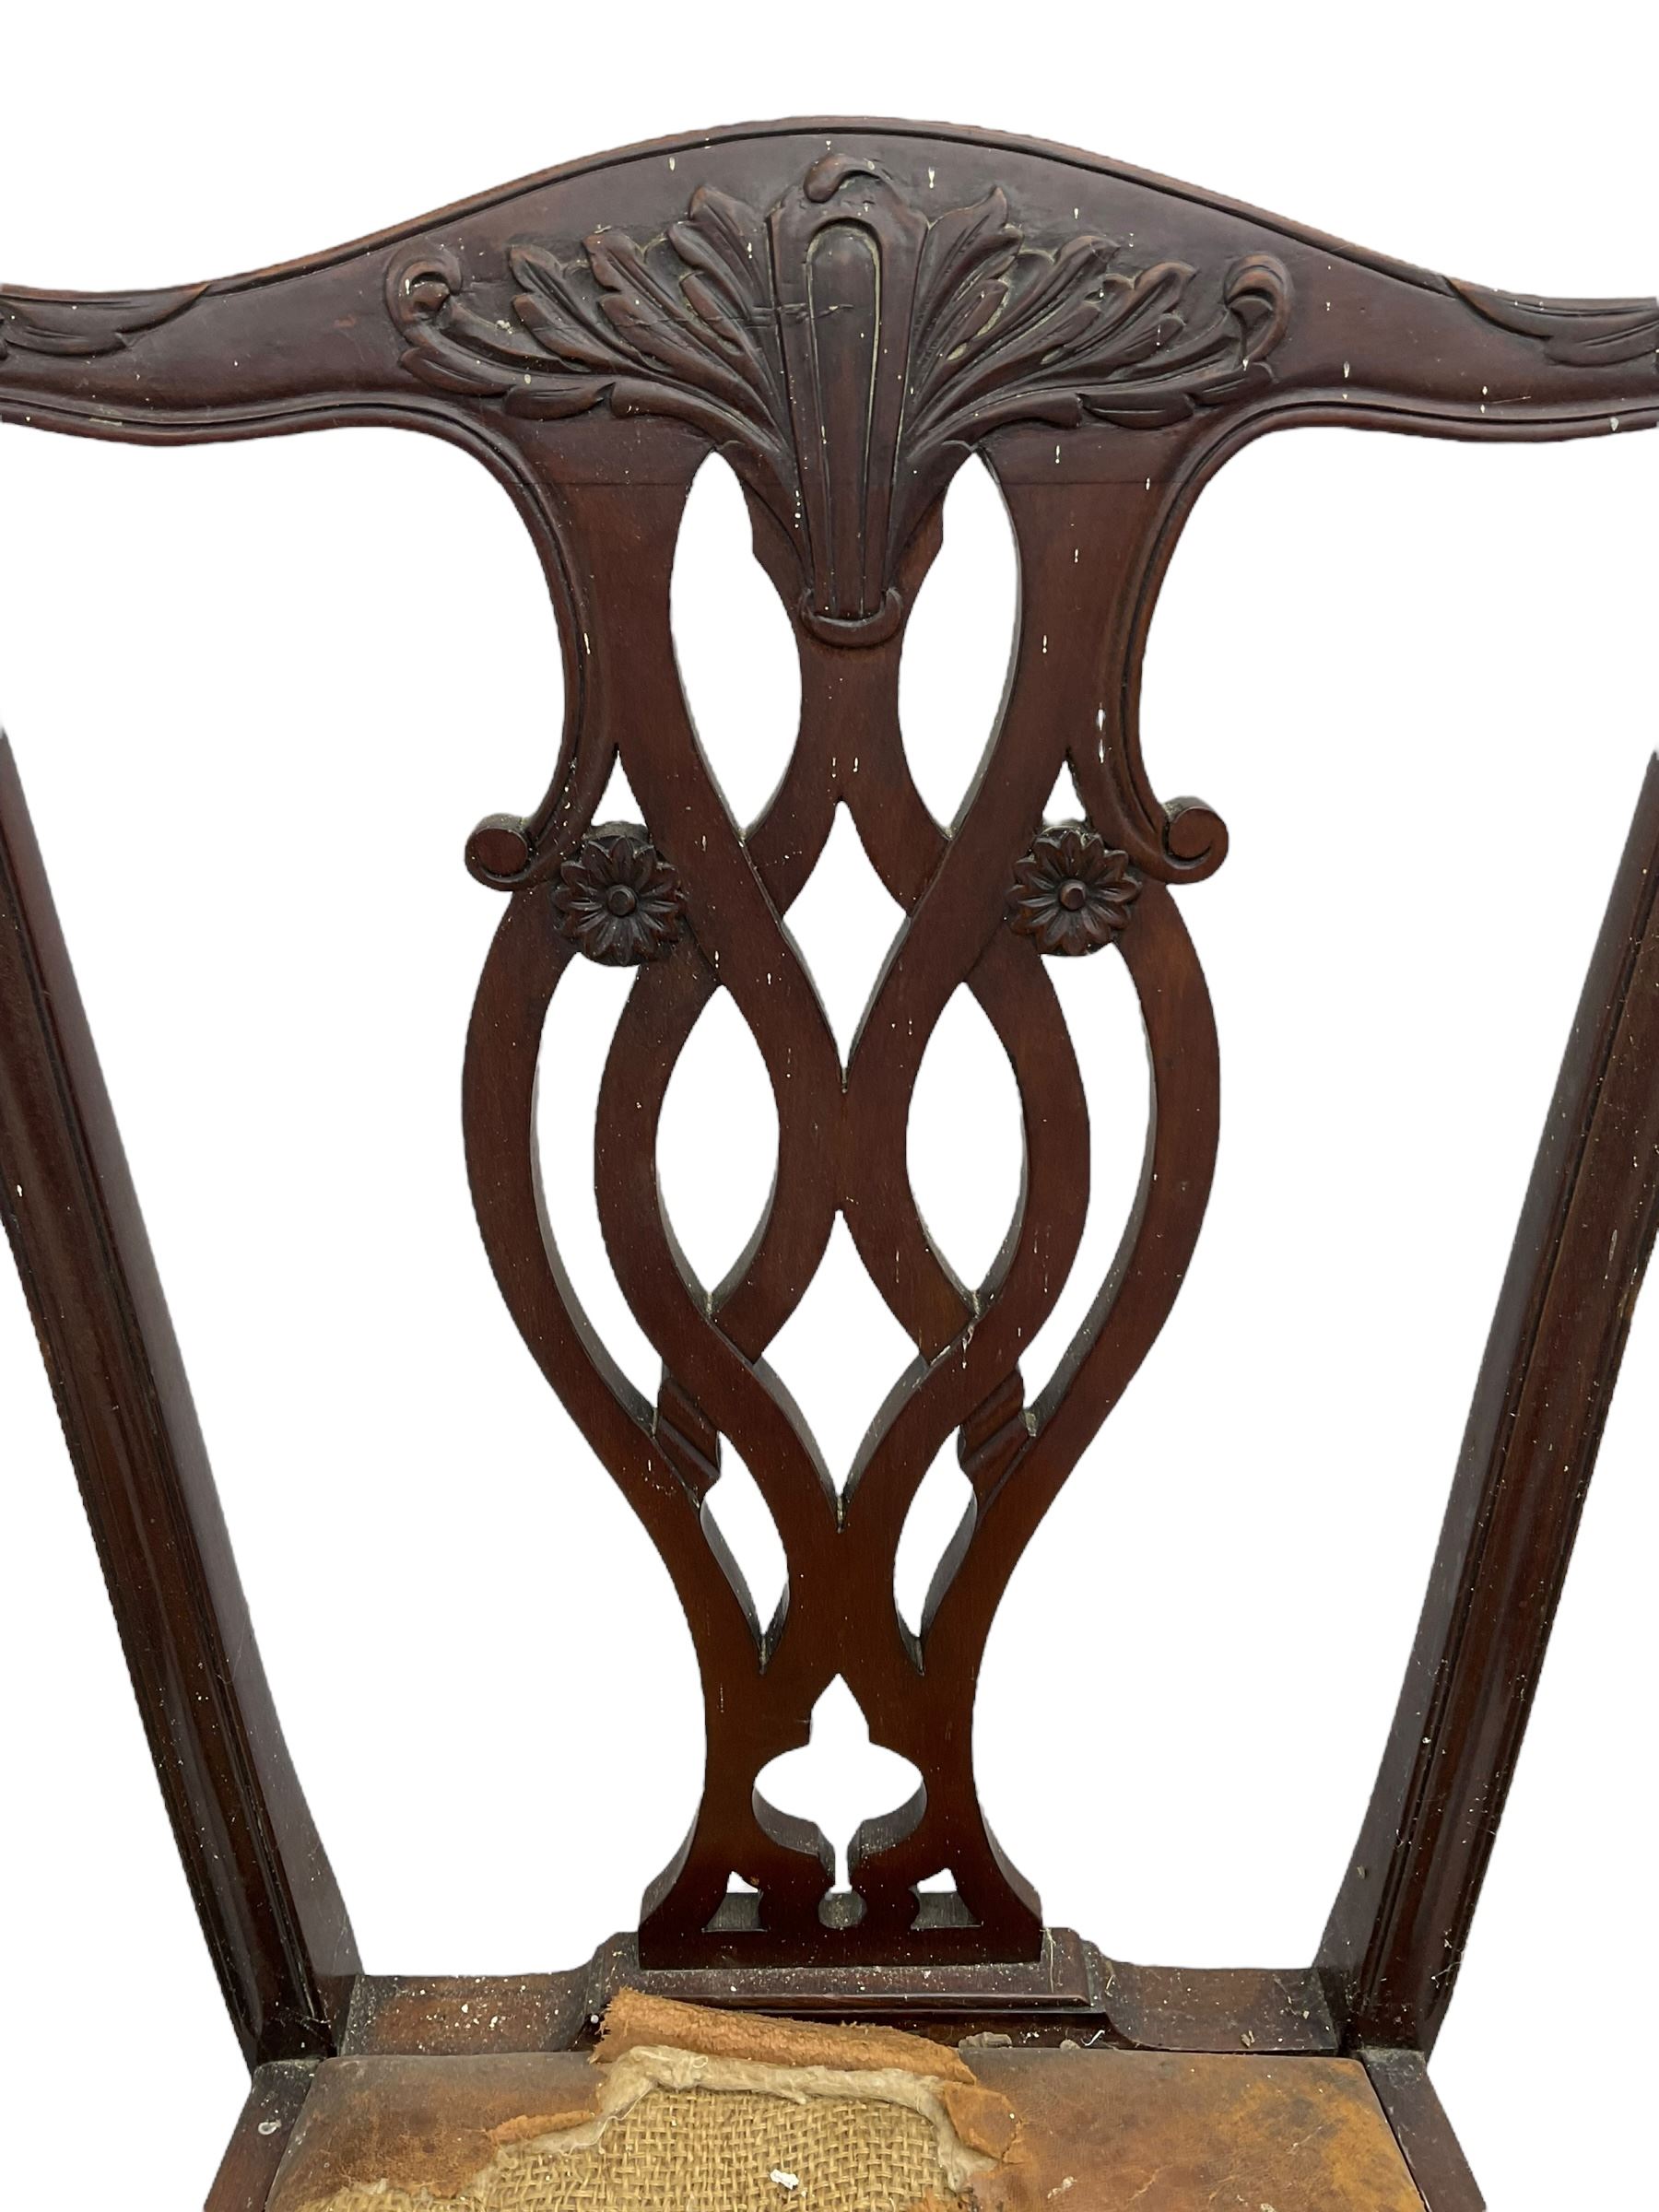 Set of eight (6+2) early 20th century Chippendale design mahogany dining chairs - Image 10 of 14